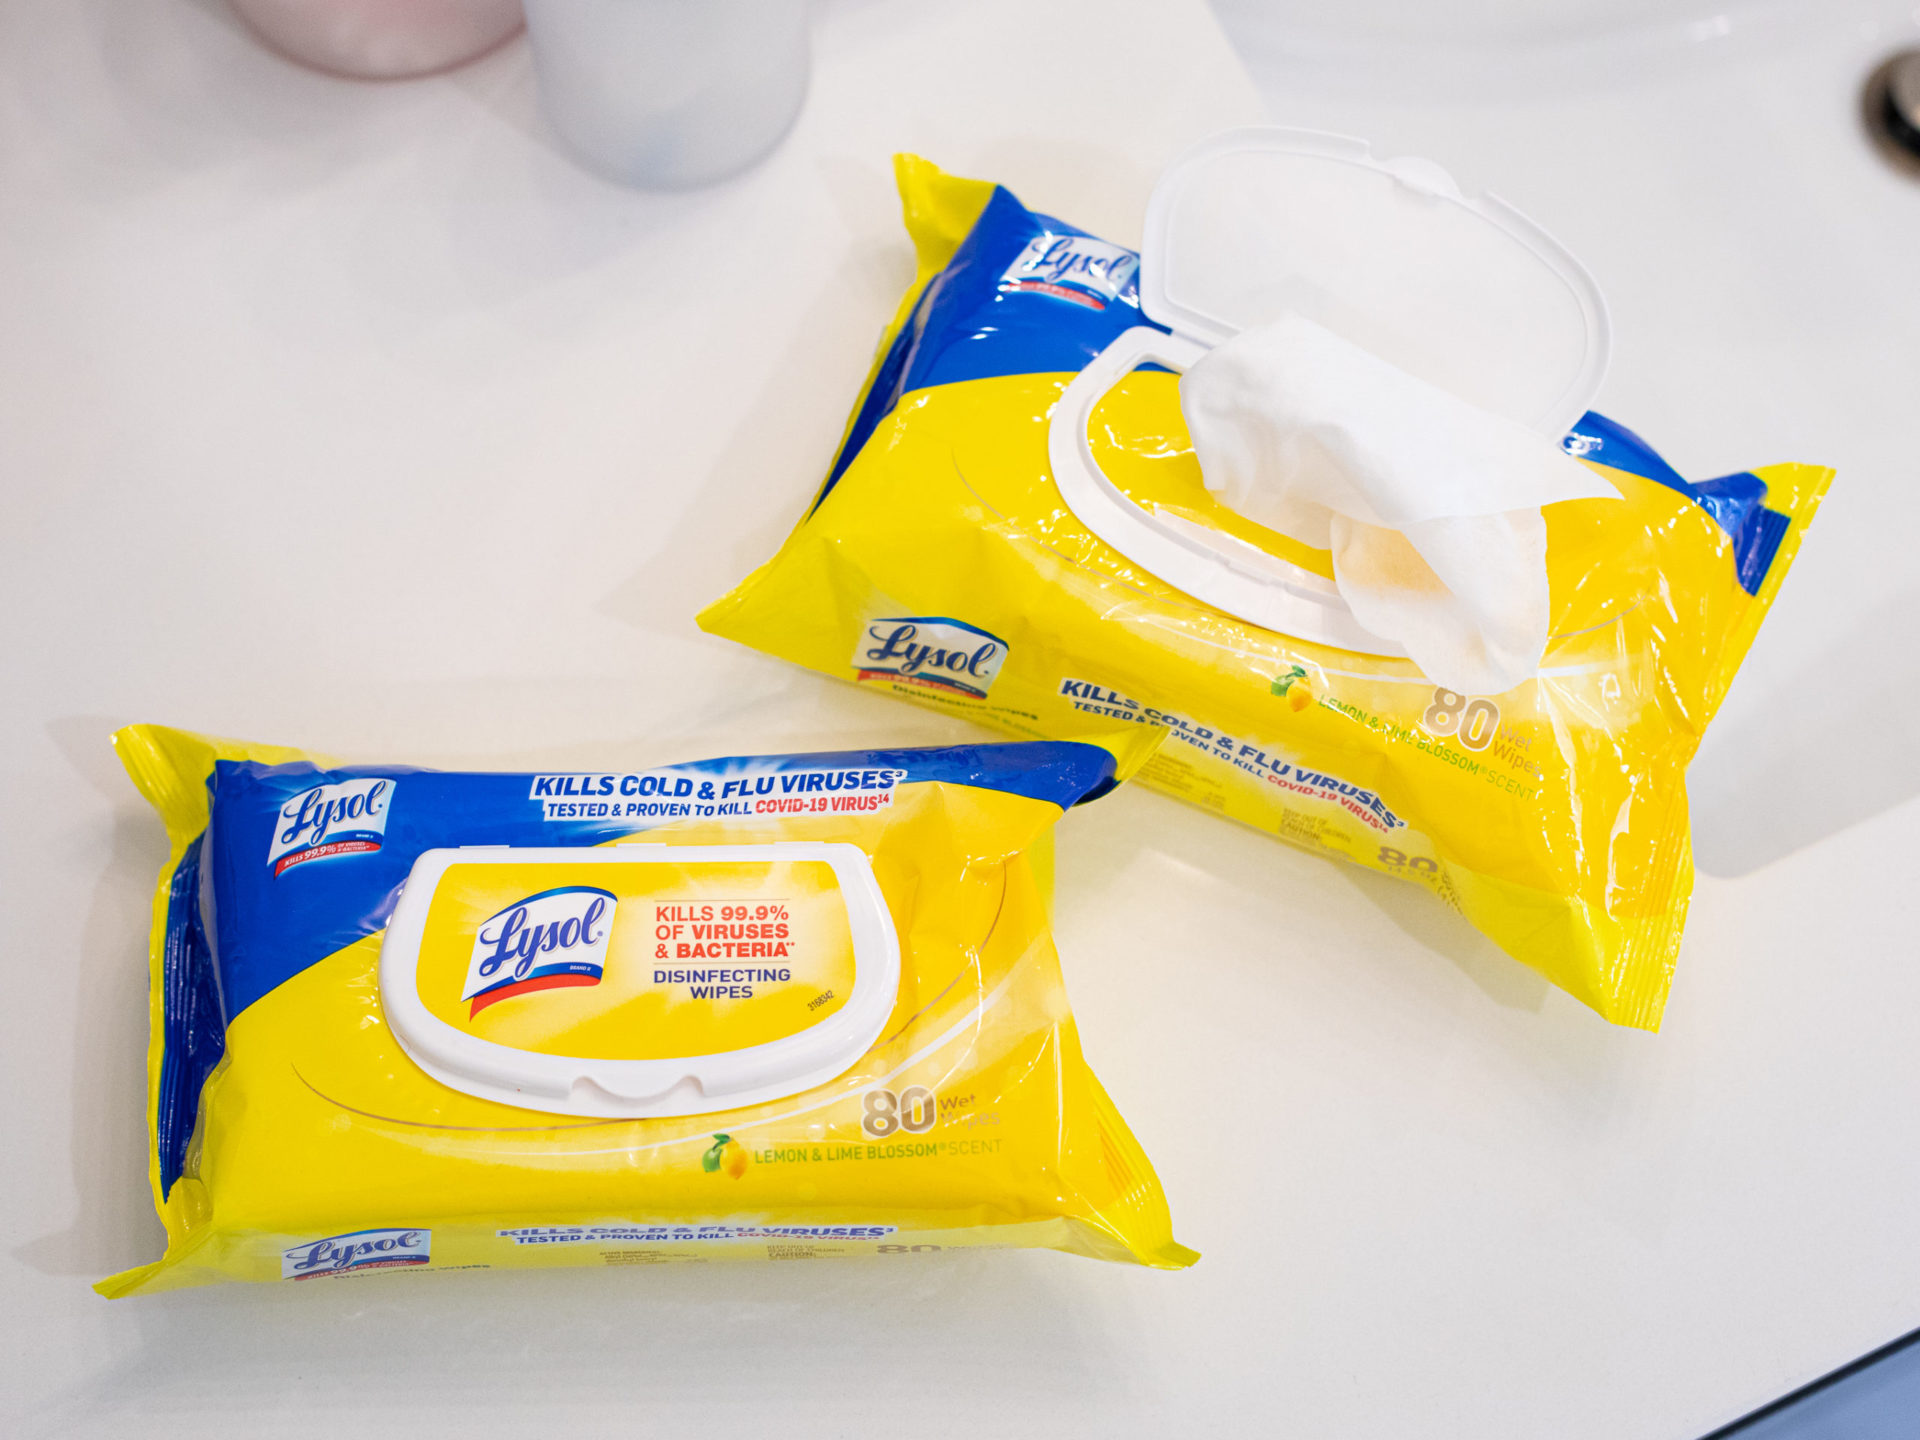 Get Lysol Disinfecting Wipes For Just $2.80 At Publix